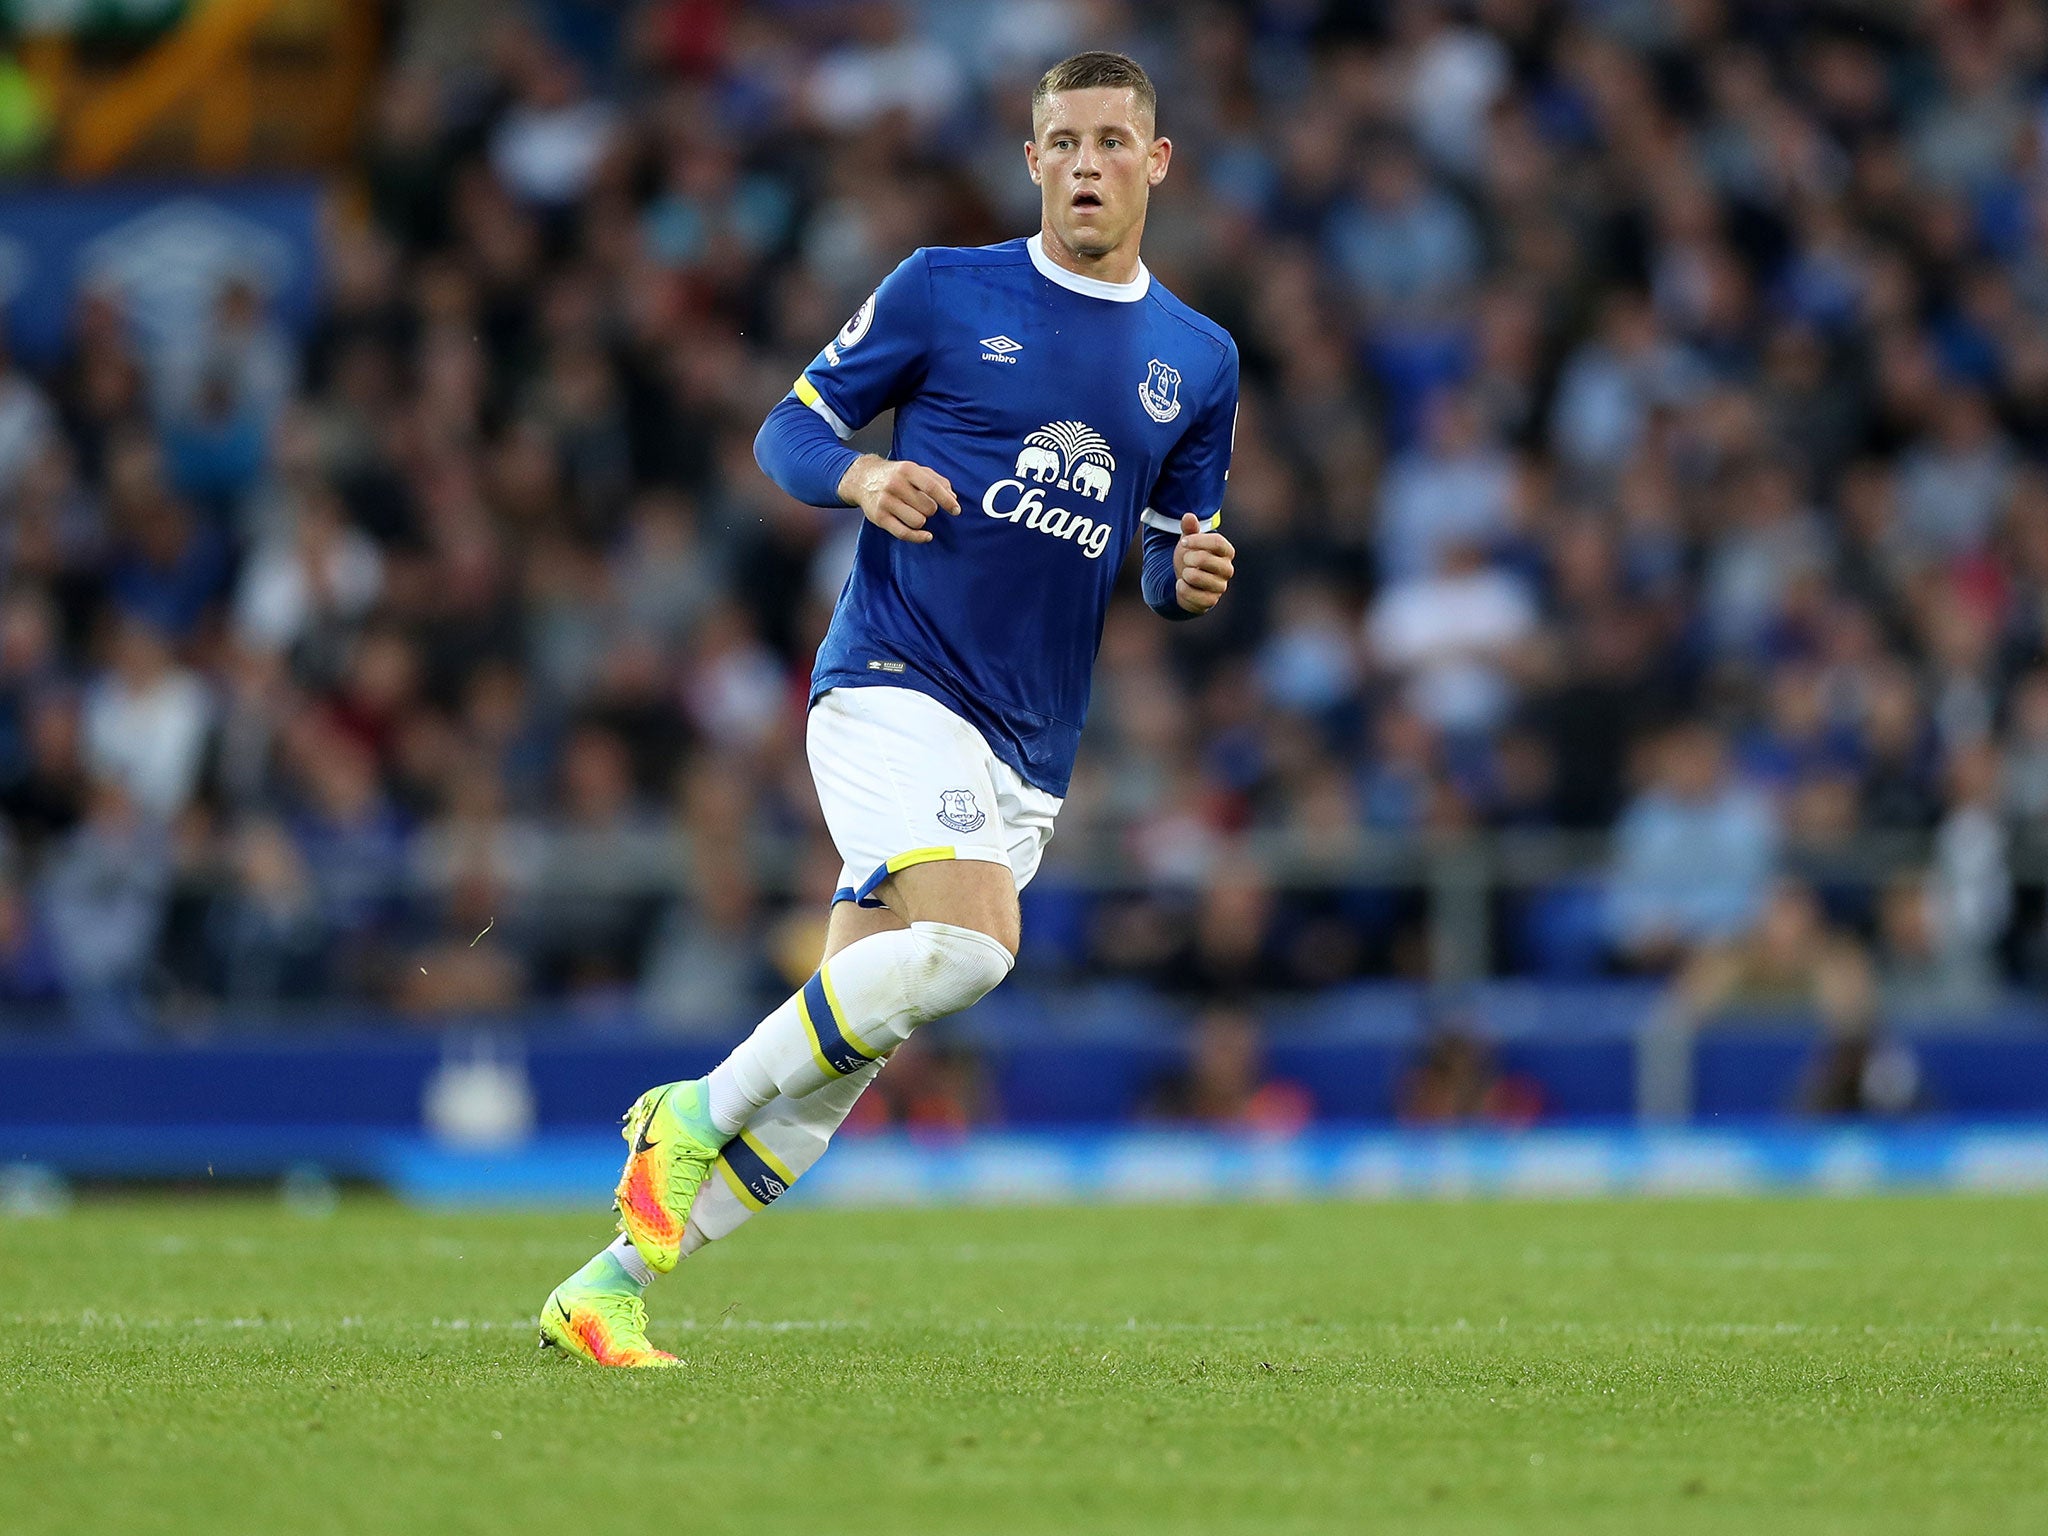 Ross Barkley has joined a long list of England midfielders yet to deliver on their full potential